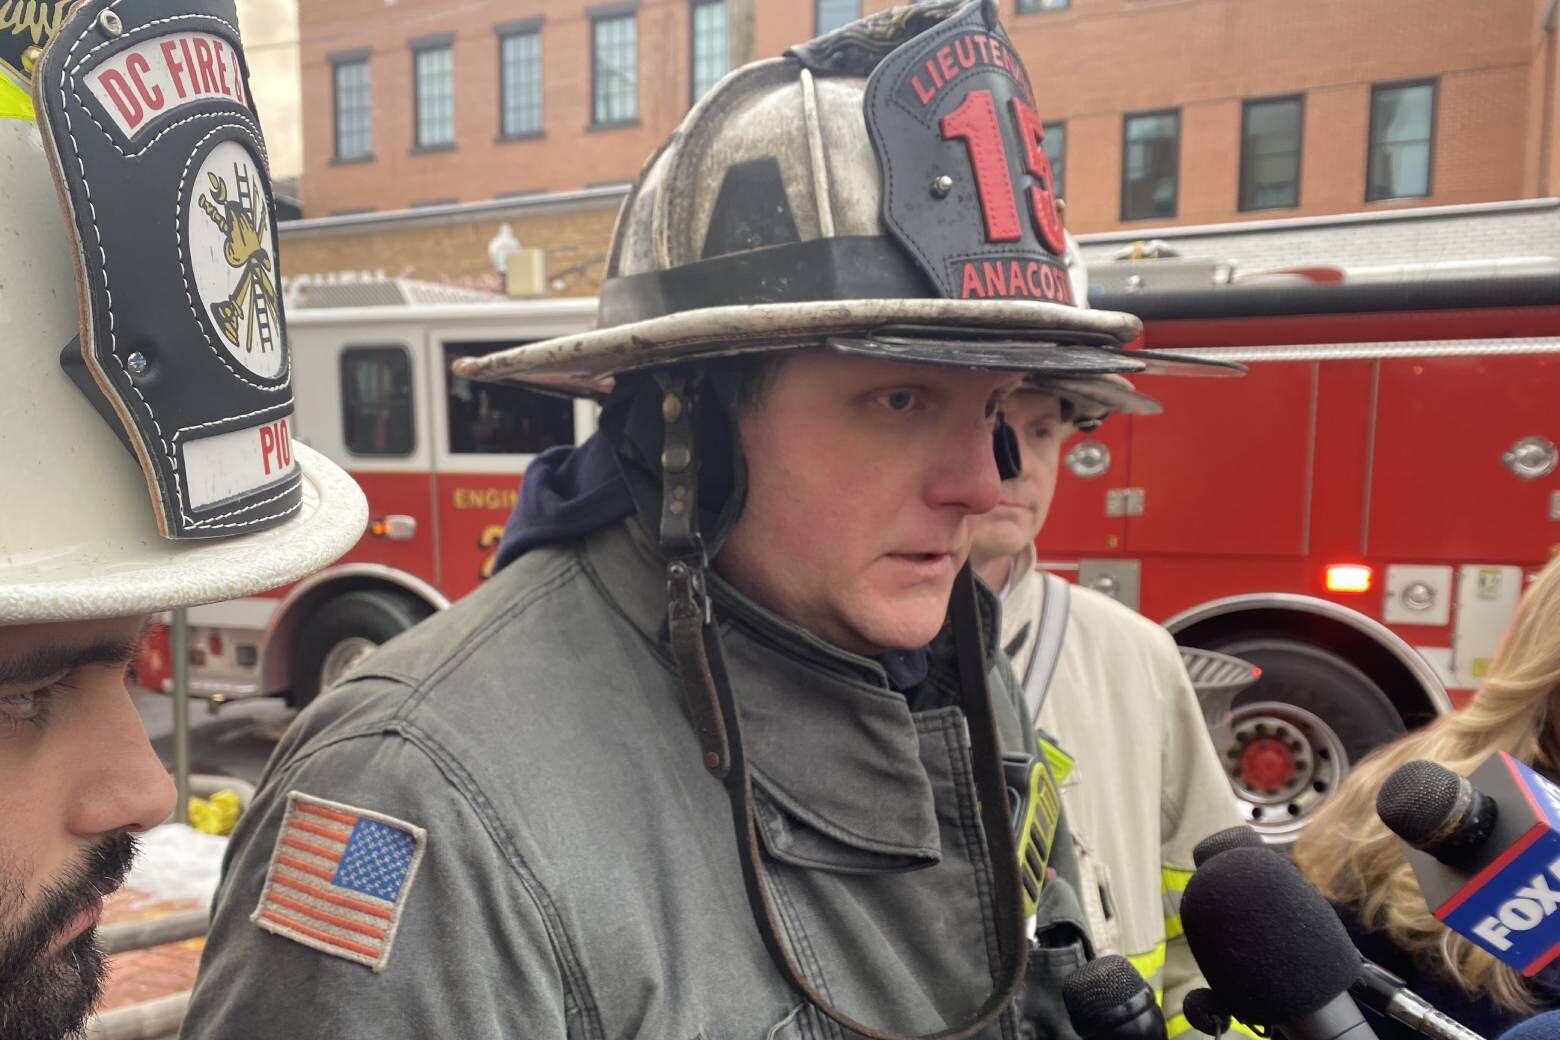 Lt. Ryan Bolton with D.C. Fire and EMS was one of the first firefighters on the scene. (WTOP/John Domen)